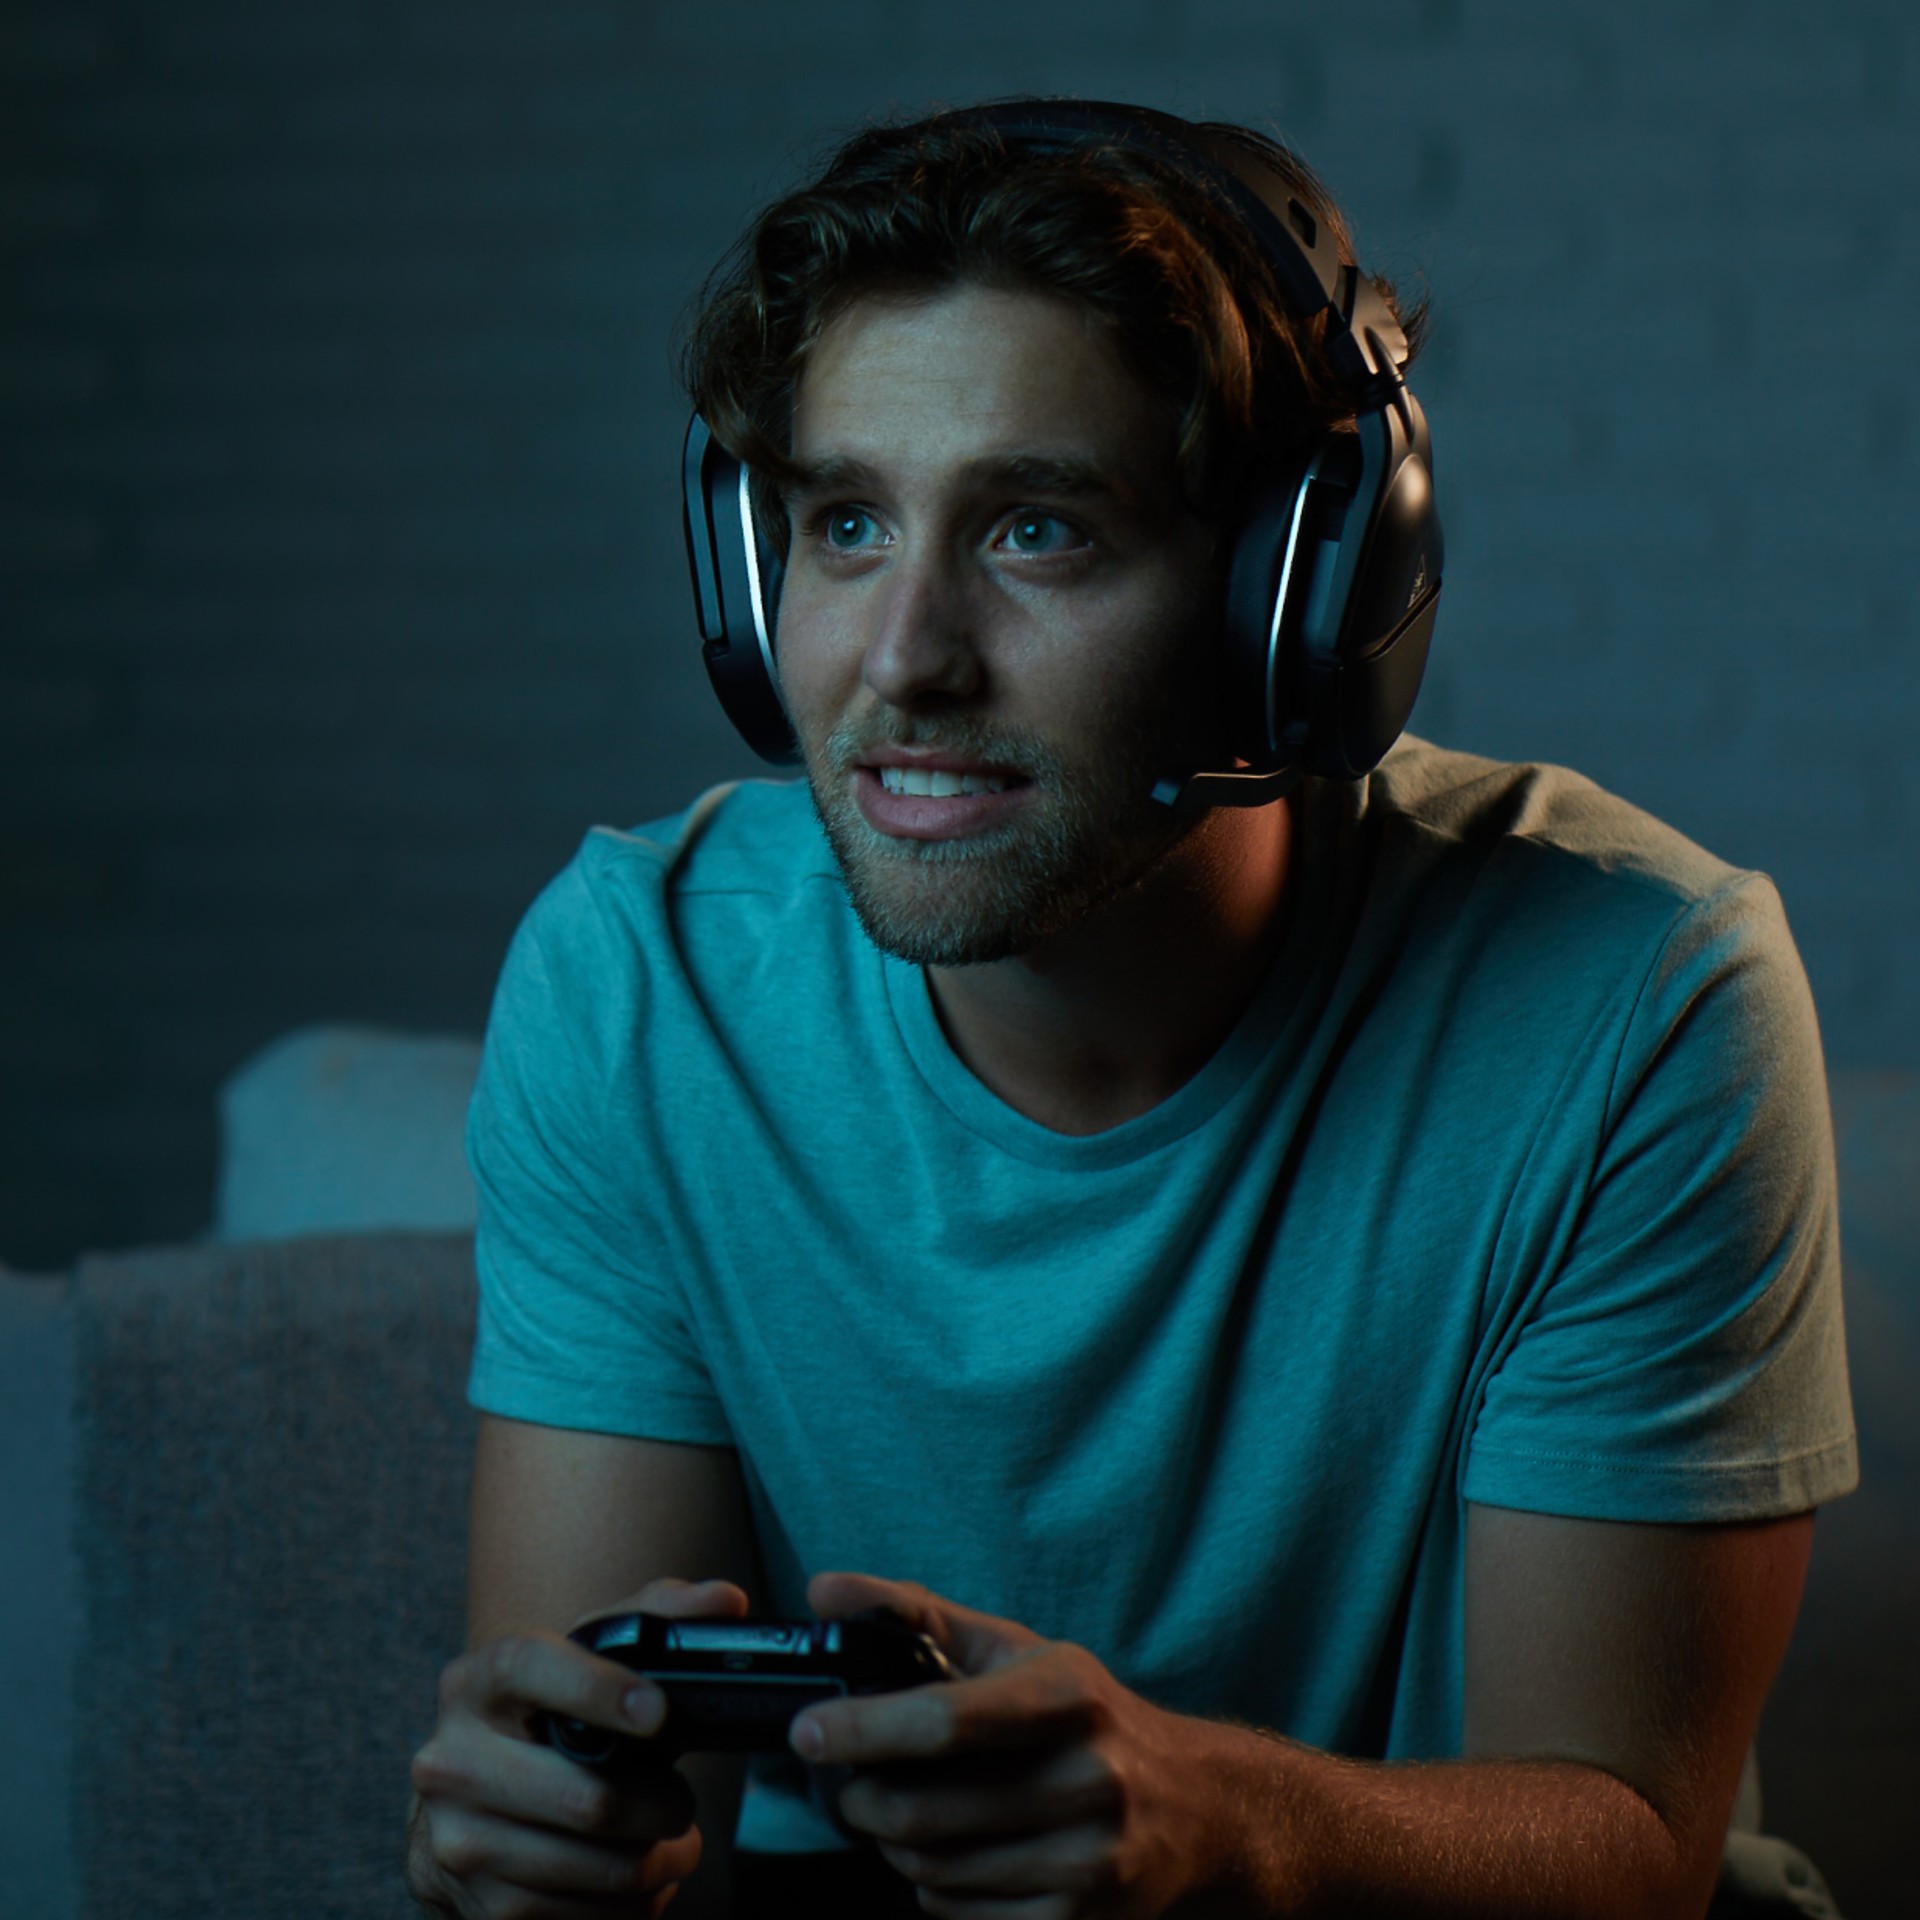 Premium wireless chat with a larger flip-up mic that seamlessly integrates into the headset.